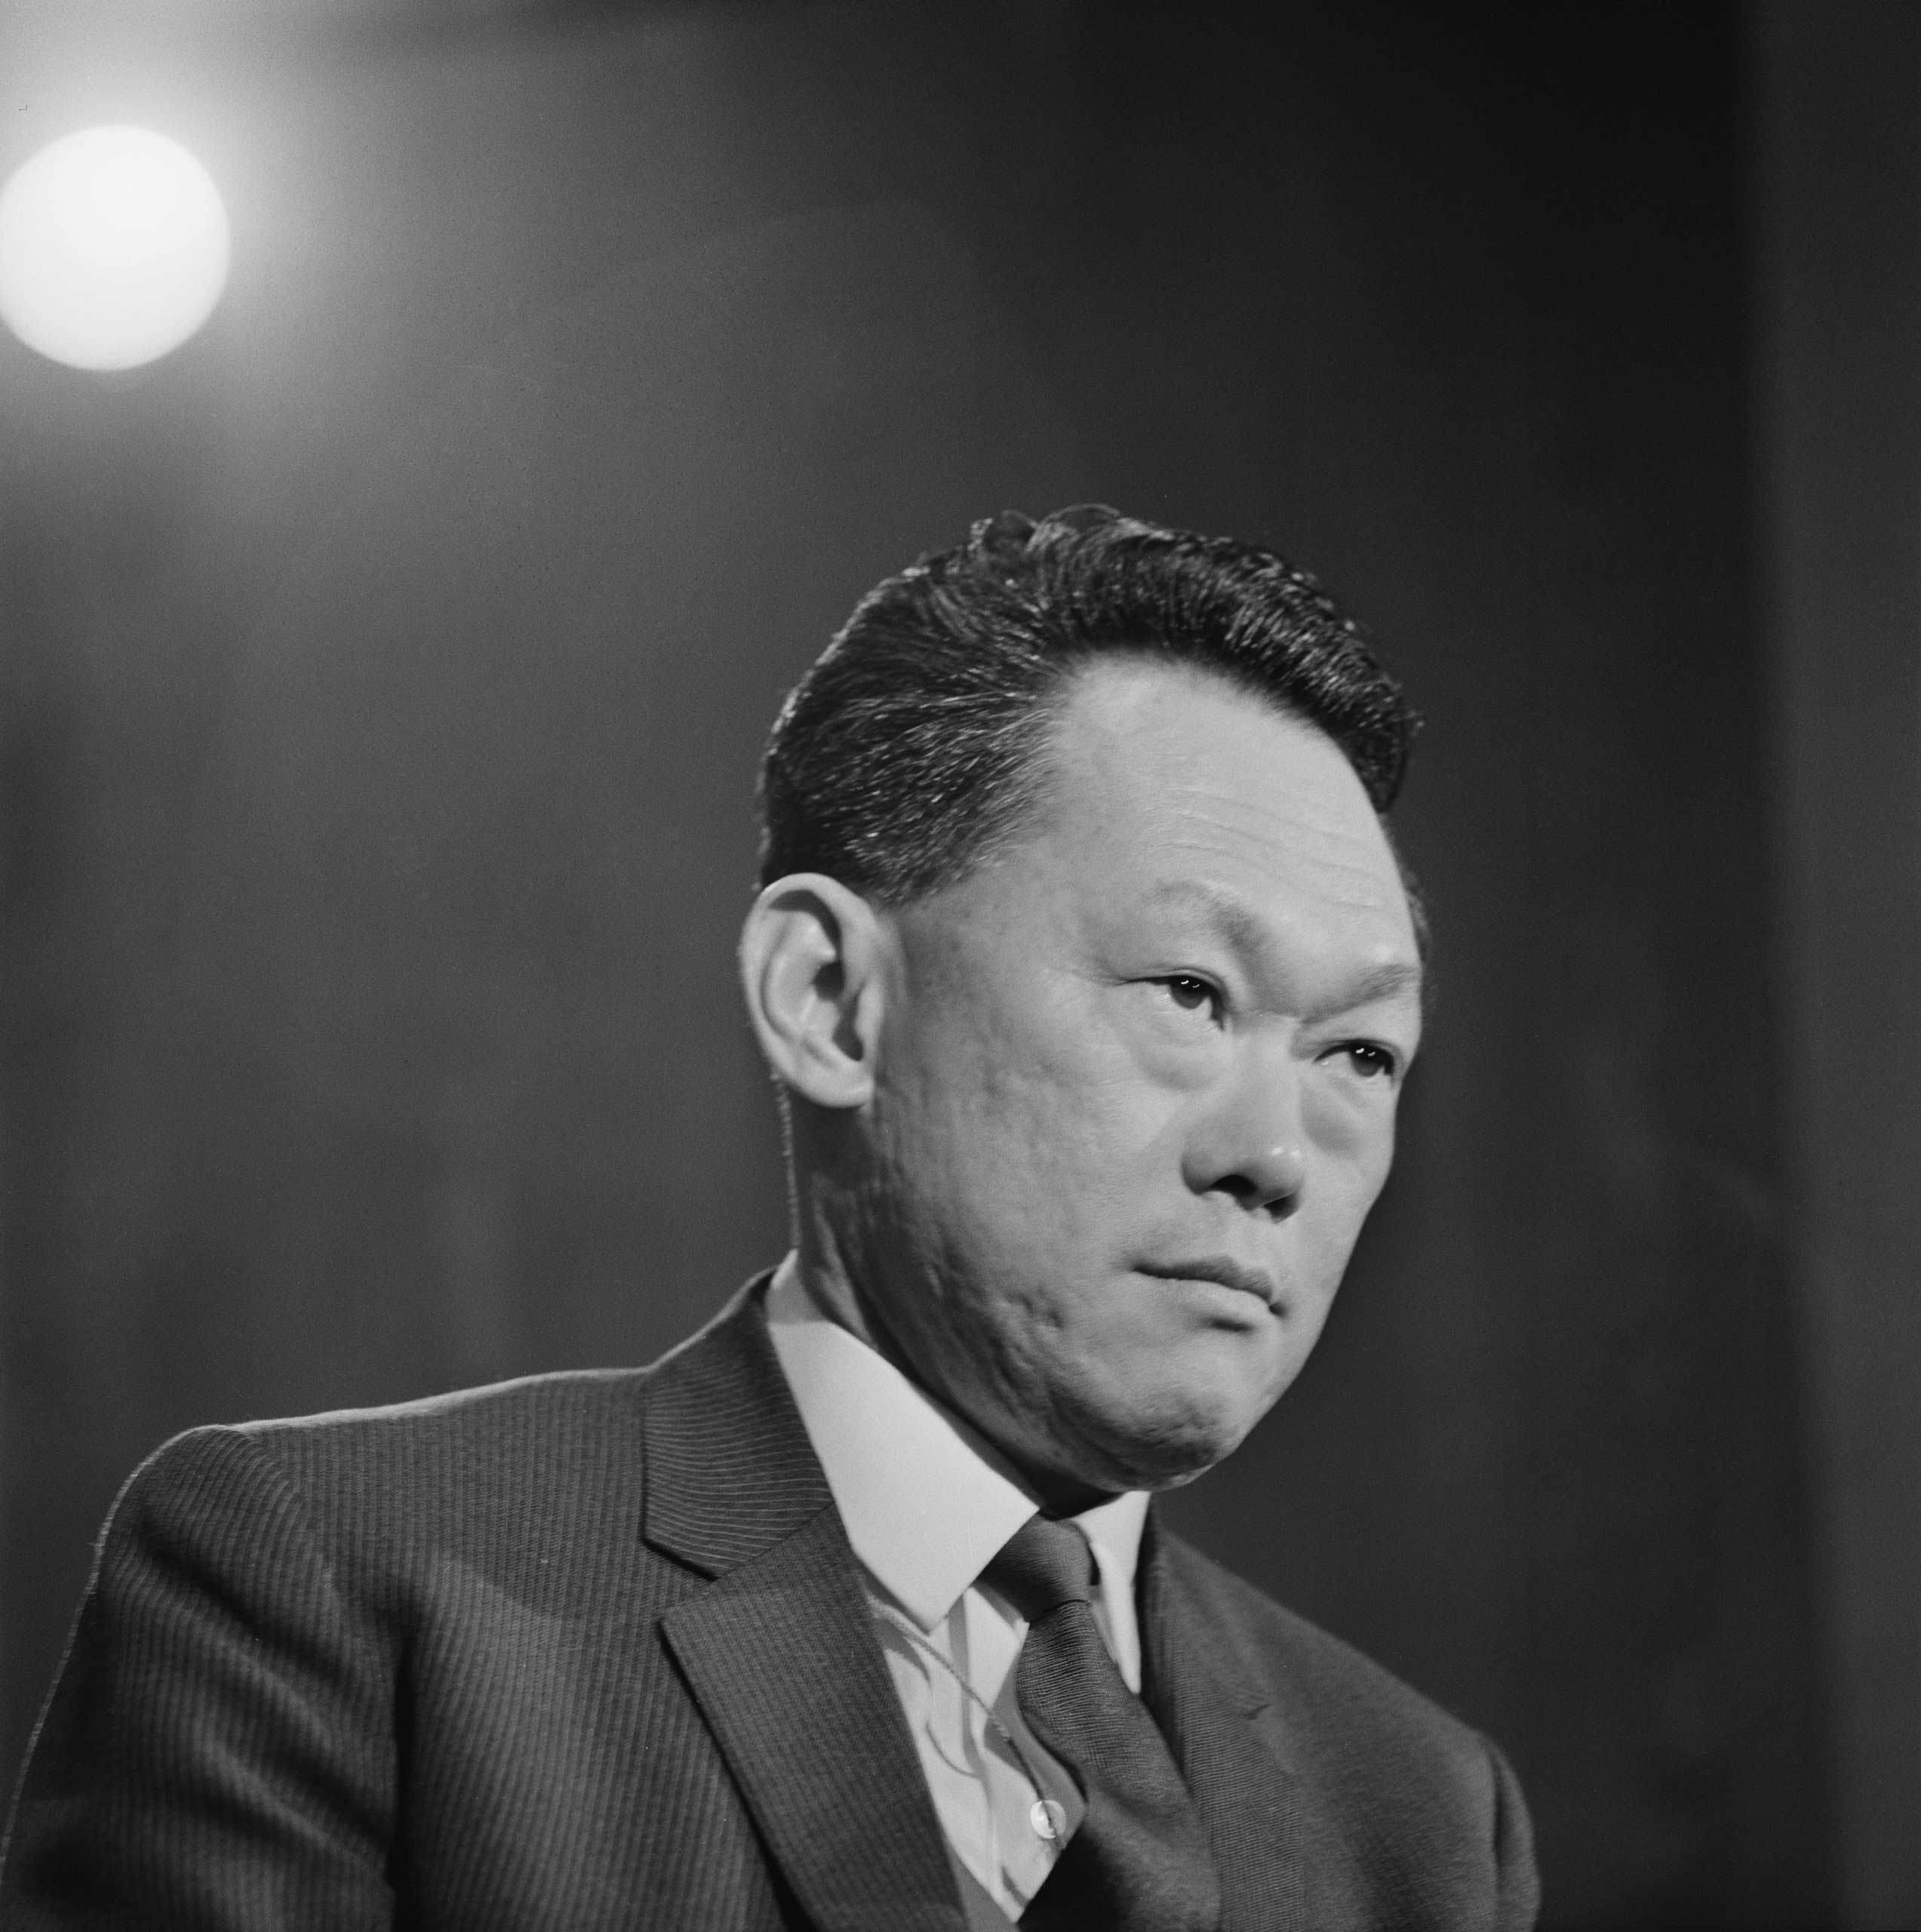 Prime Minister of Singapore Lee Kuan Yew (1923-2015), seen in 1969.